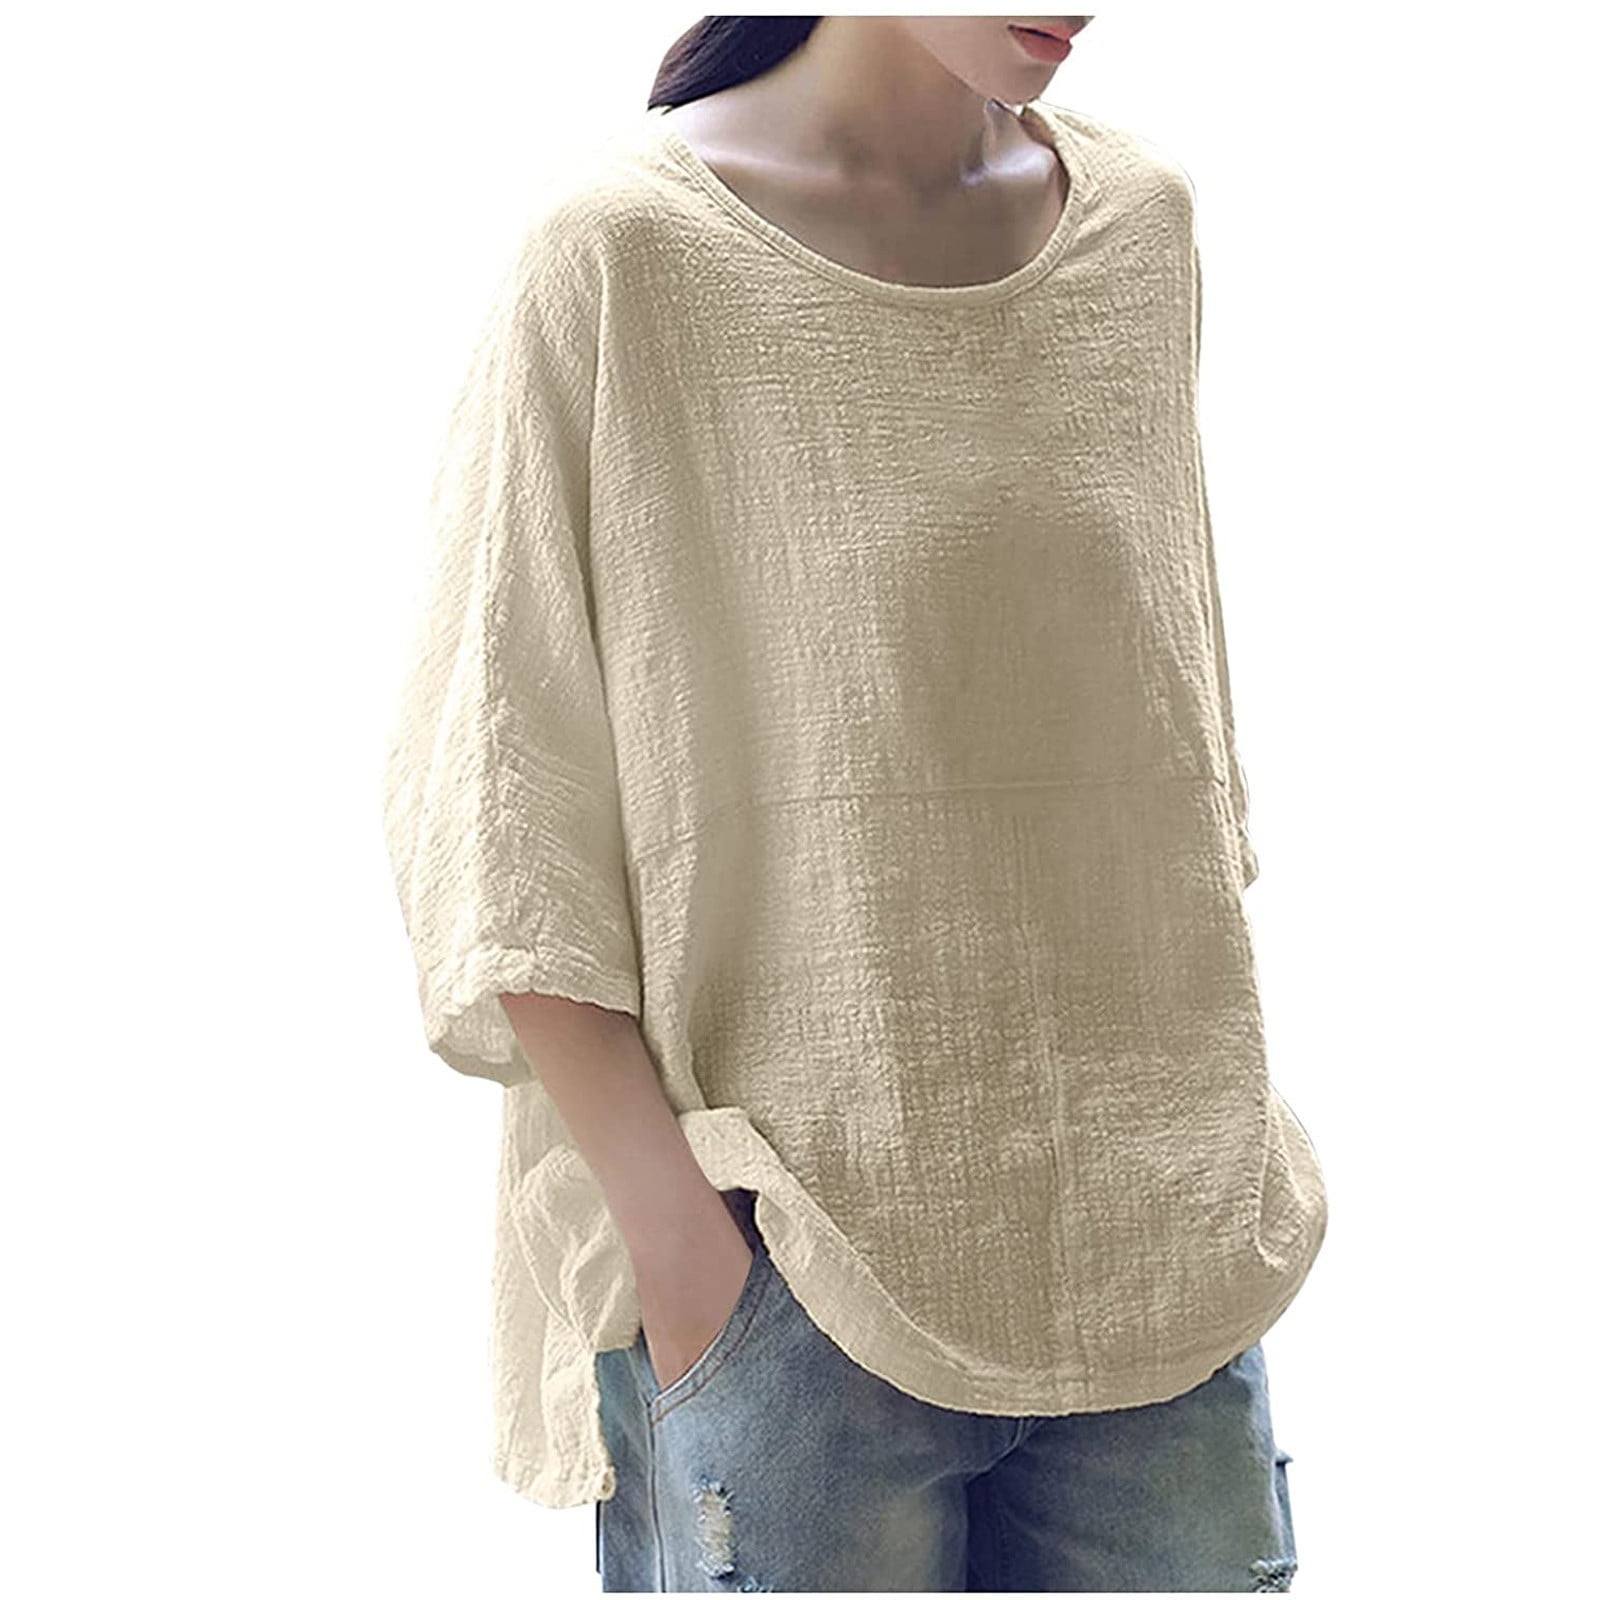 Vintage Tunic Tops July 4th 3/4 Sleeve Soft Comfortable Linen Tee Shirt Heart-Shape Casual Loose Blouse S-XXL 